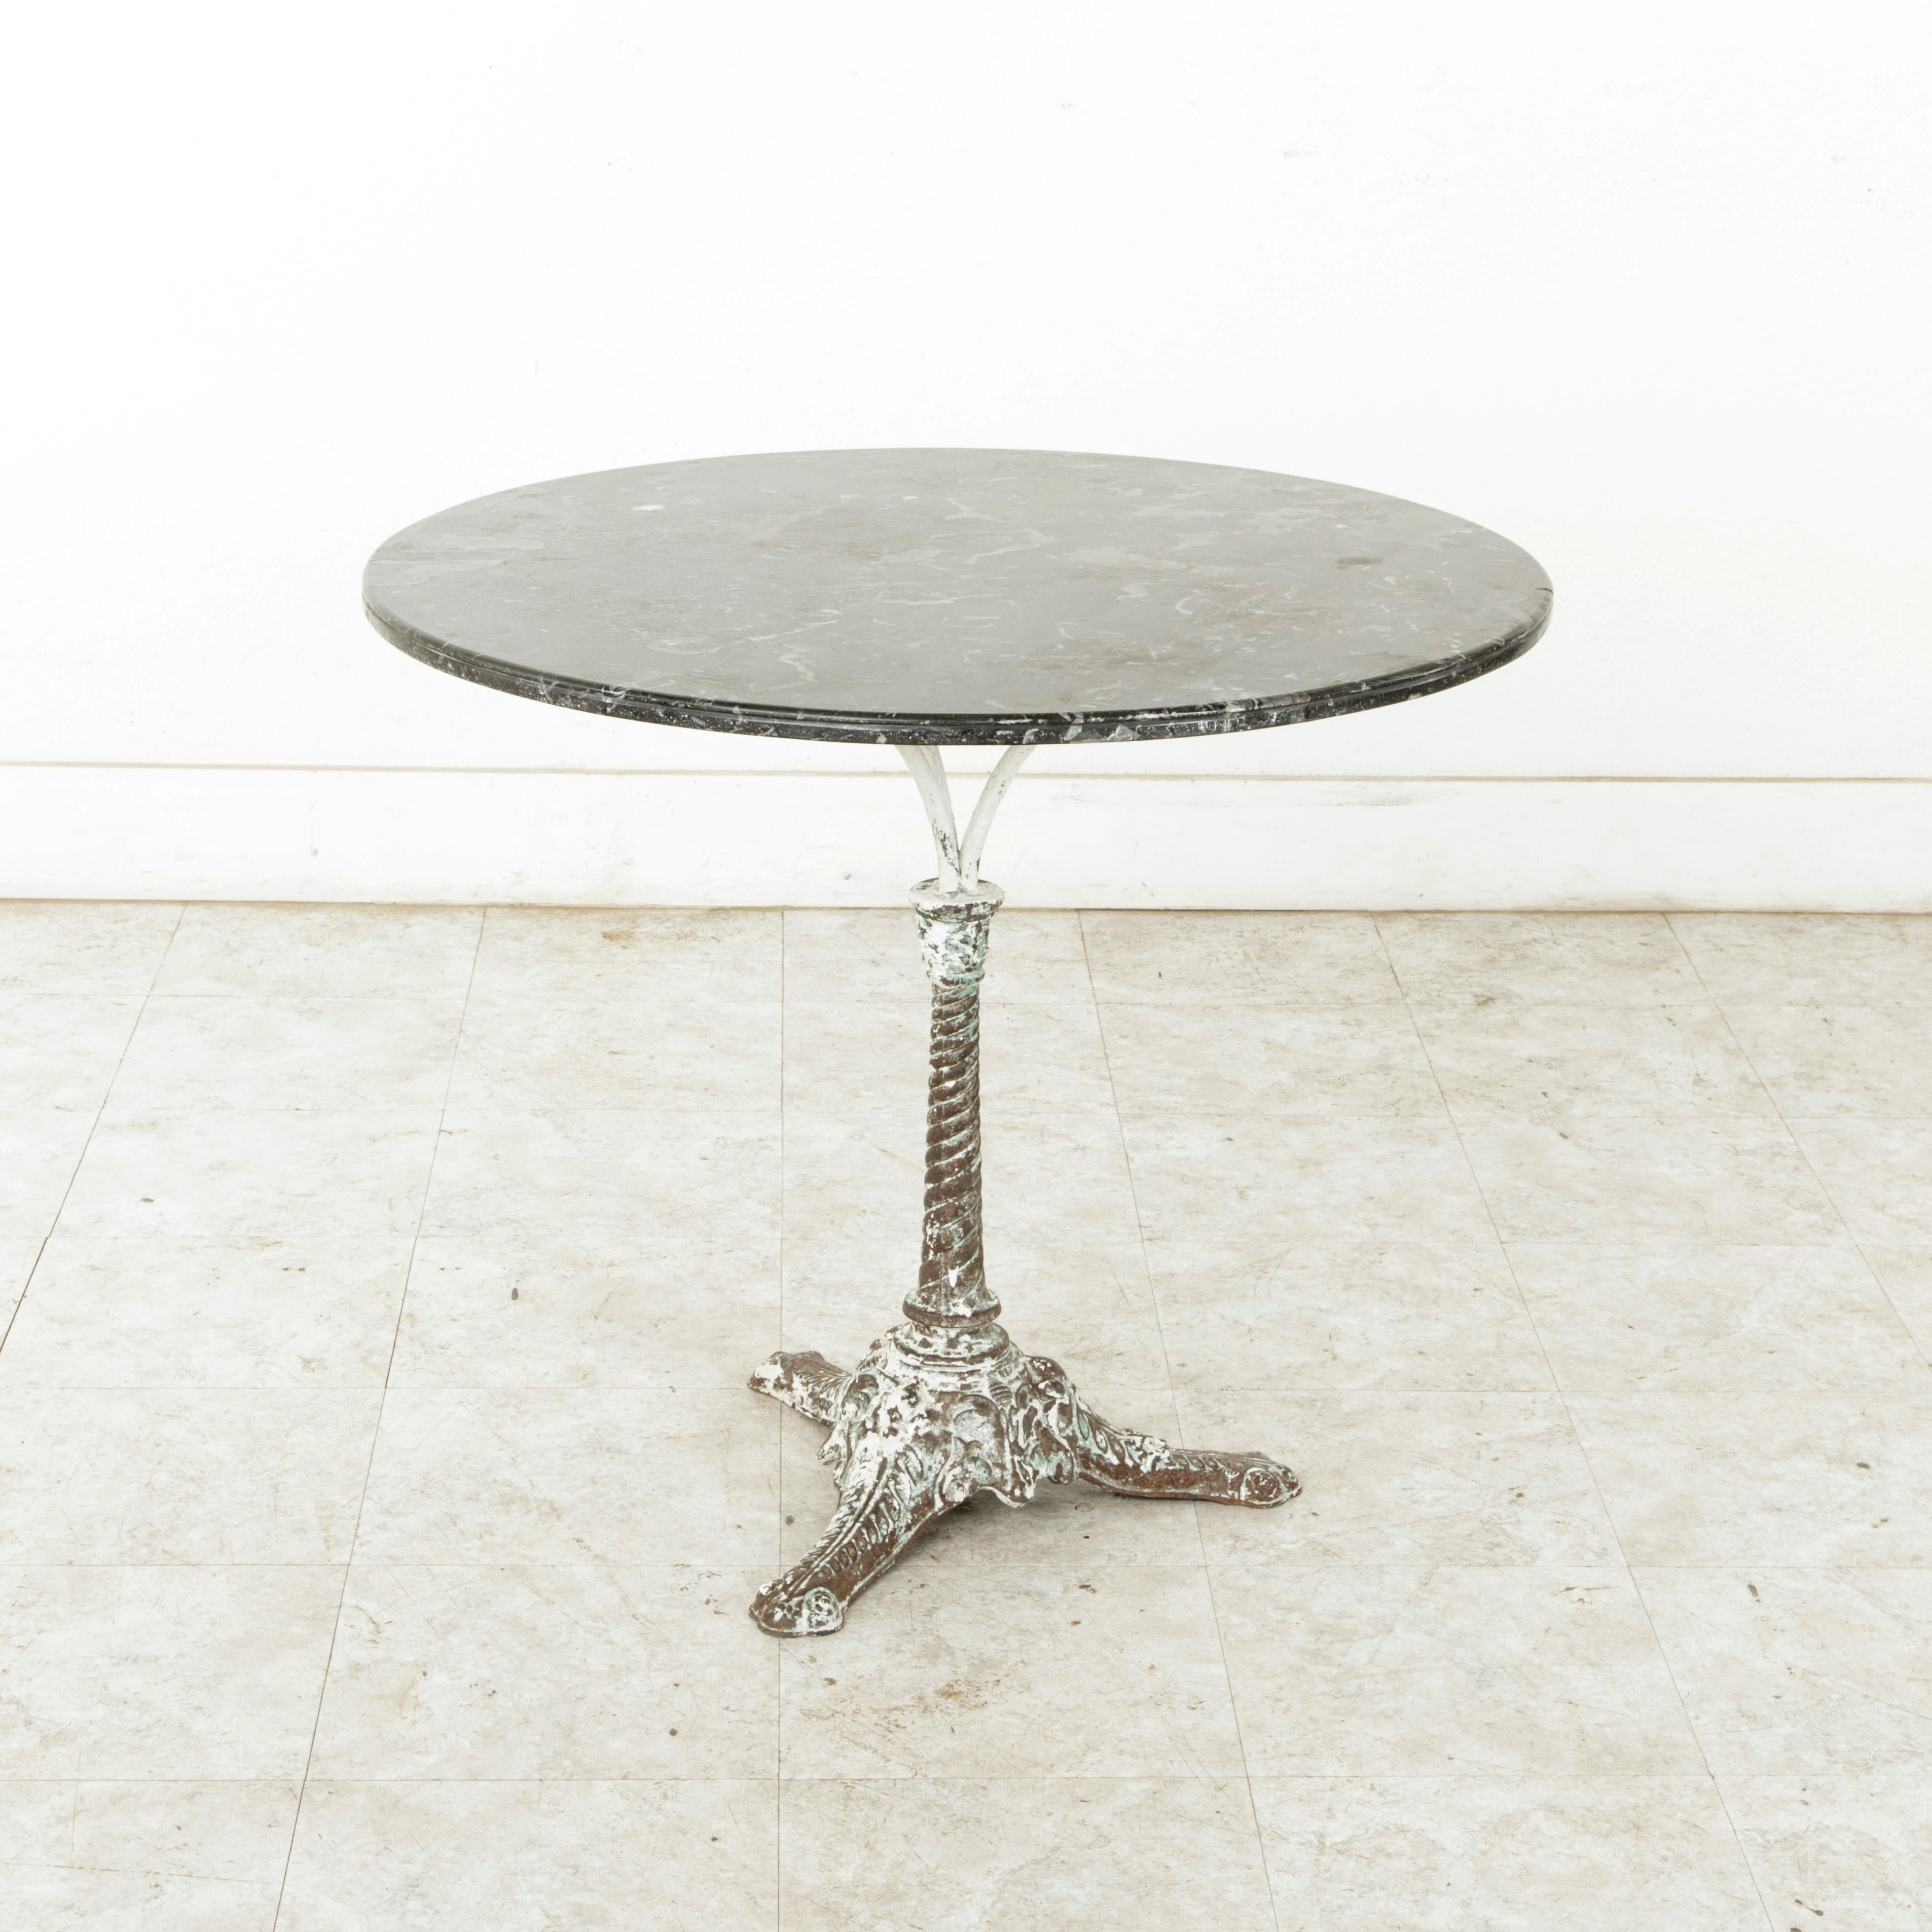 This French iron garden table from the turn of the 20th century features a 32-inch diameter Saint Anne black marble top with white and grey veining. The marble top rests on a iron tripod support joined to the central spiraling pillar. The pillar